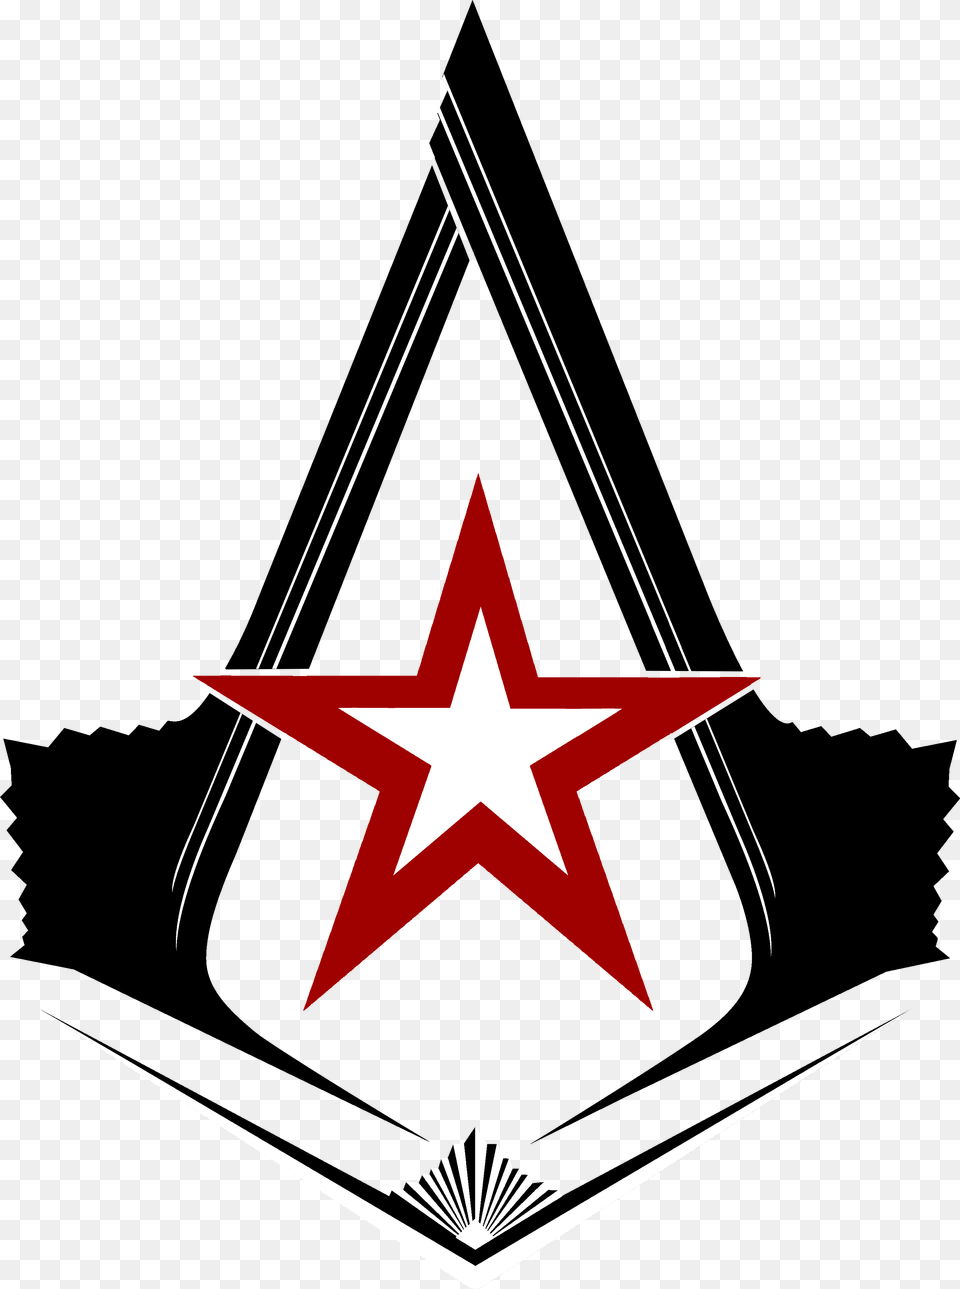 Jedi Order Symbol Assassin39s Creed Russia Logo, Star Symbol, First Aid Png Image